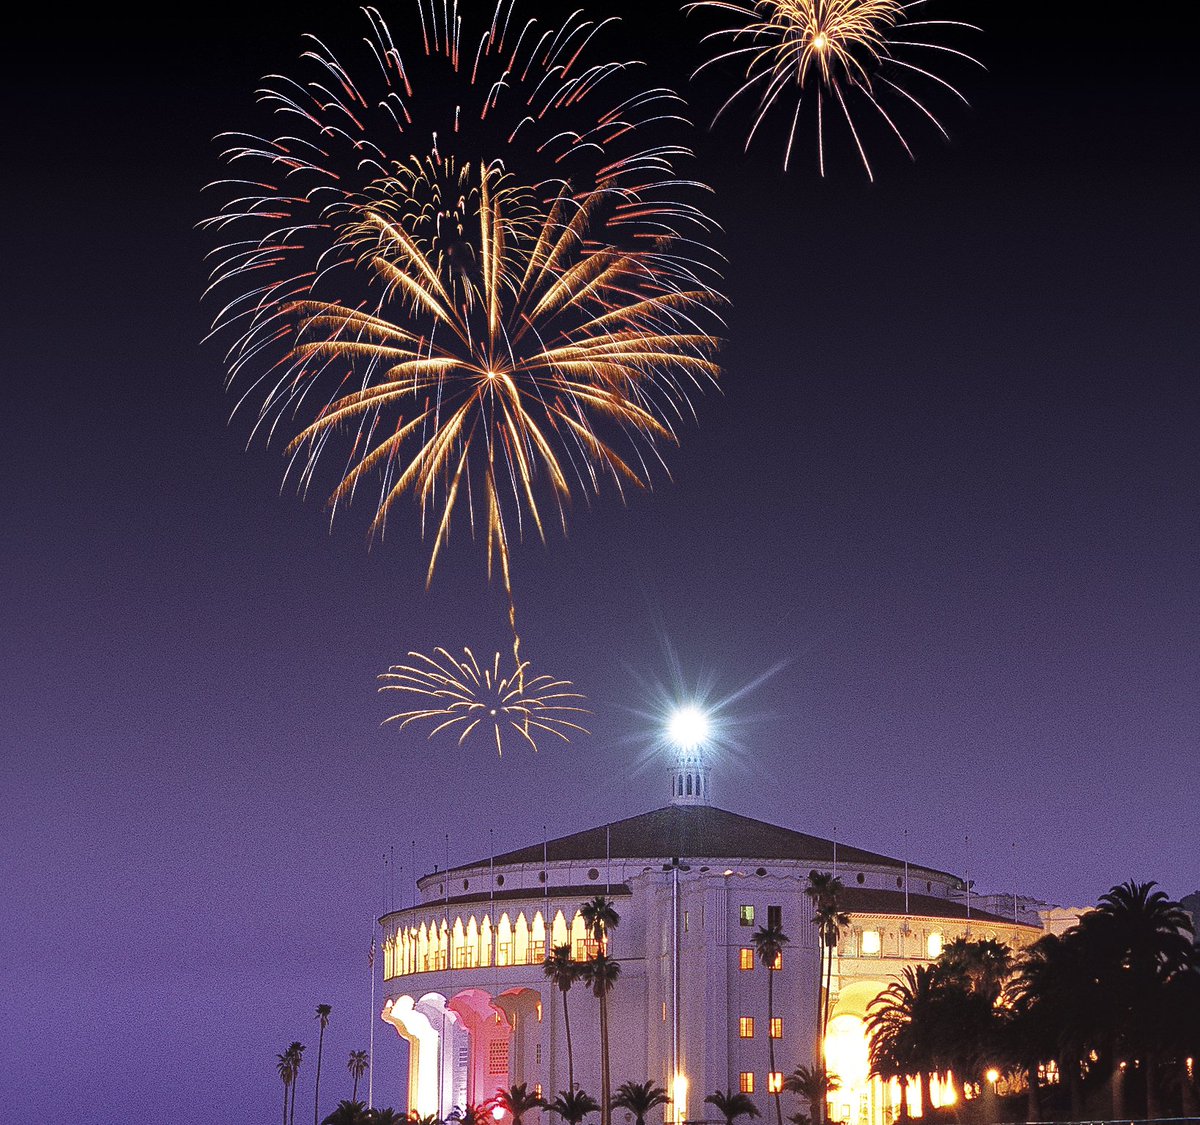 Join us in celebrating America's birthday on Catalina Island. Our oceanfront location offers the perfect spot to watch the spectacular fireworks show, lighting up the night sky over Avalon Harbor.

🔗 SeaportVillageInn.com

#catalinaisland #seaportvillageinn #4thofjuly